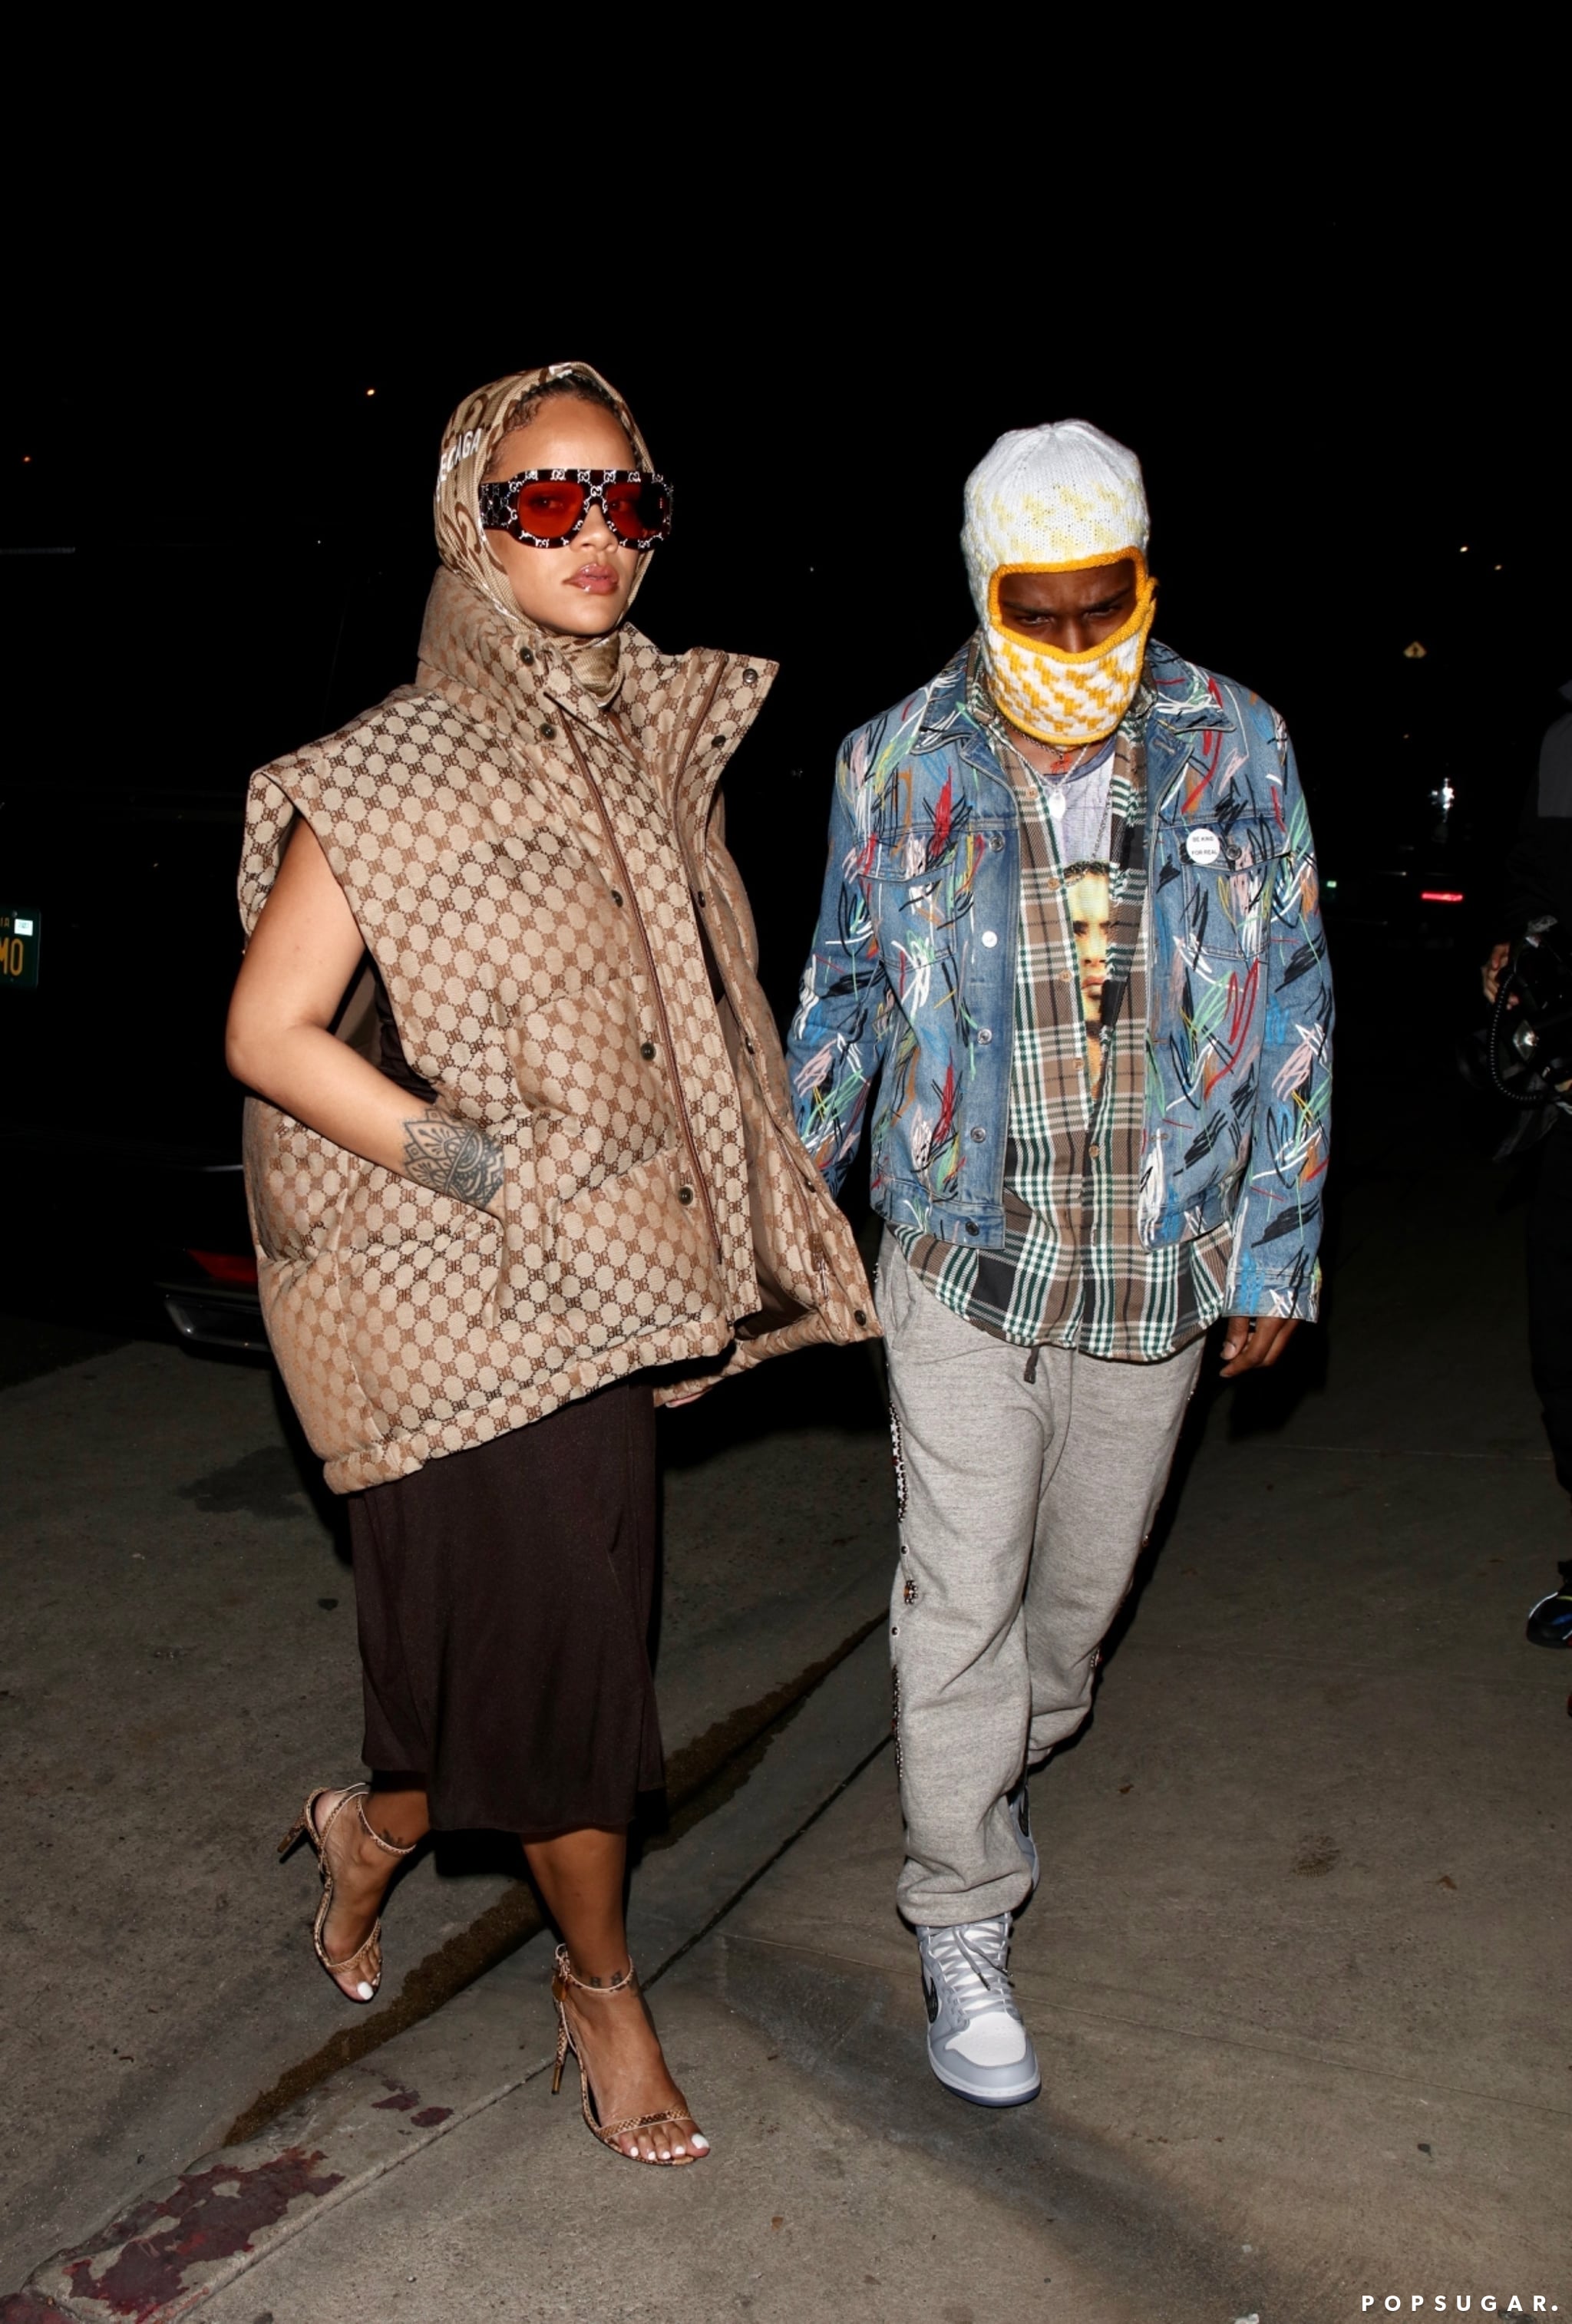 gucci on X: @rihanna was spotted carrying the sold-out Gucci